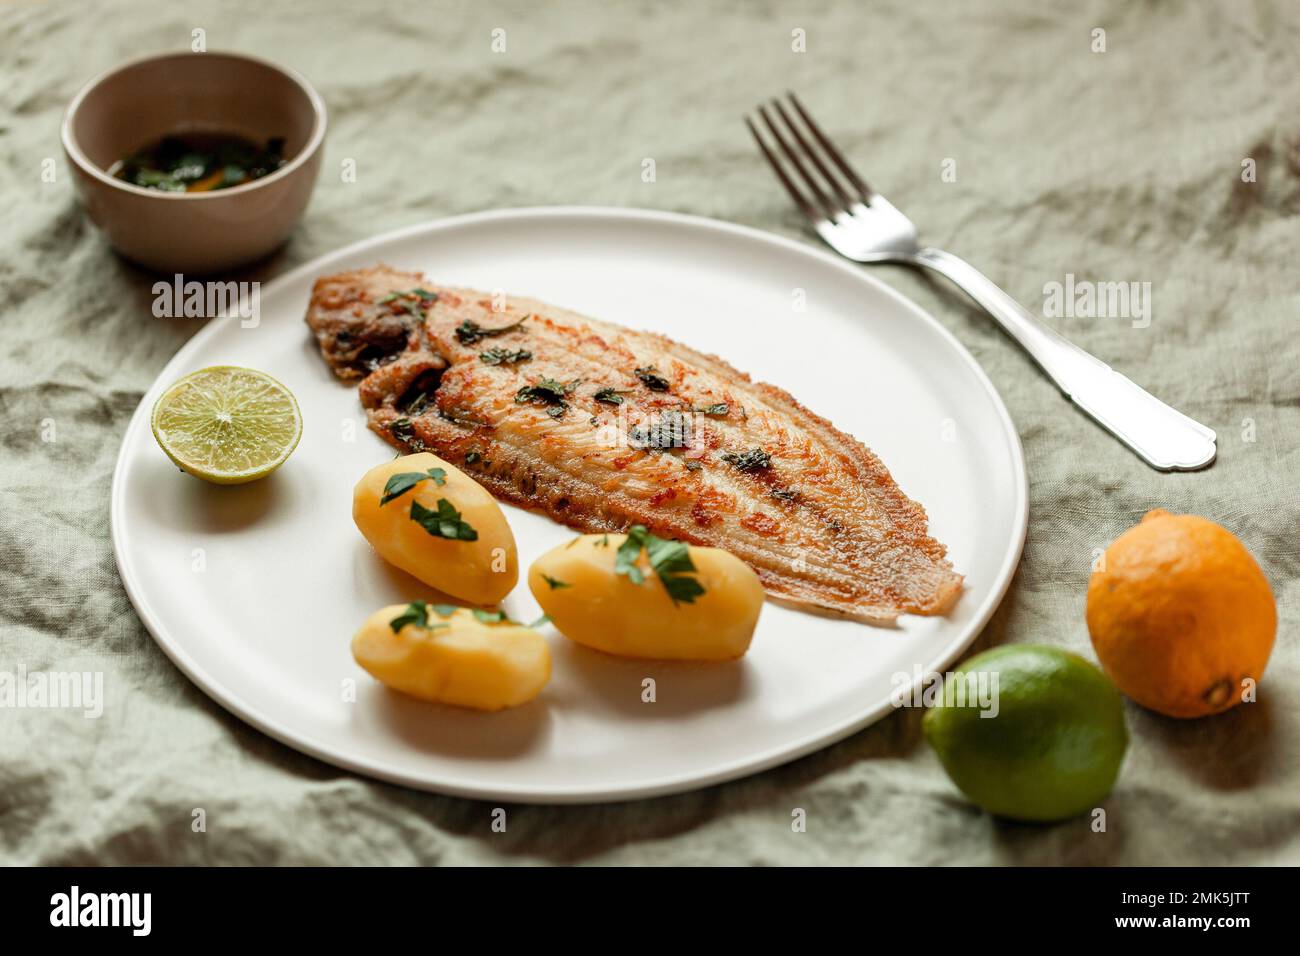 fried sole fish served with boiled potatoes and parsley sauce, plate on a kitchen napkin, side view Stock Photo